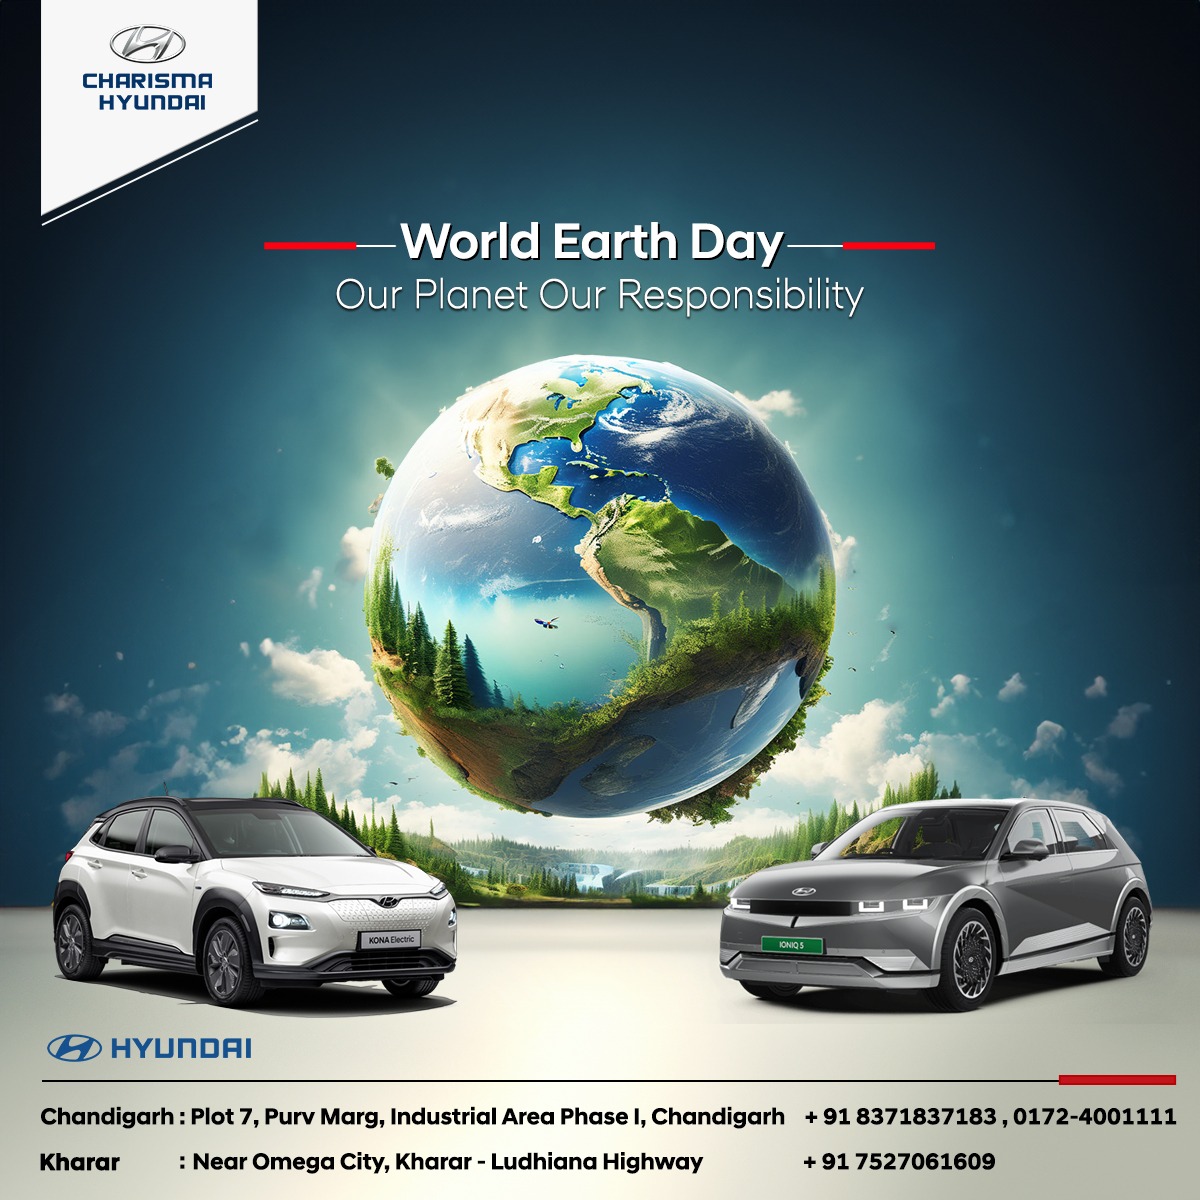 Let's join hands in a pledge to protect Mother Earth by taking small yet meaningful actions. Together, we can create a positive impact. Happy Earth Day!  #charismahyundai #hyundai #WorldEarthDay #ProtectOurPlanet #SustainableLiving #chandigarh #kharar